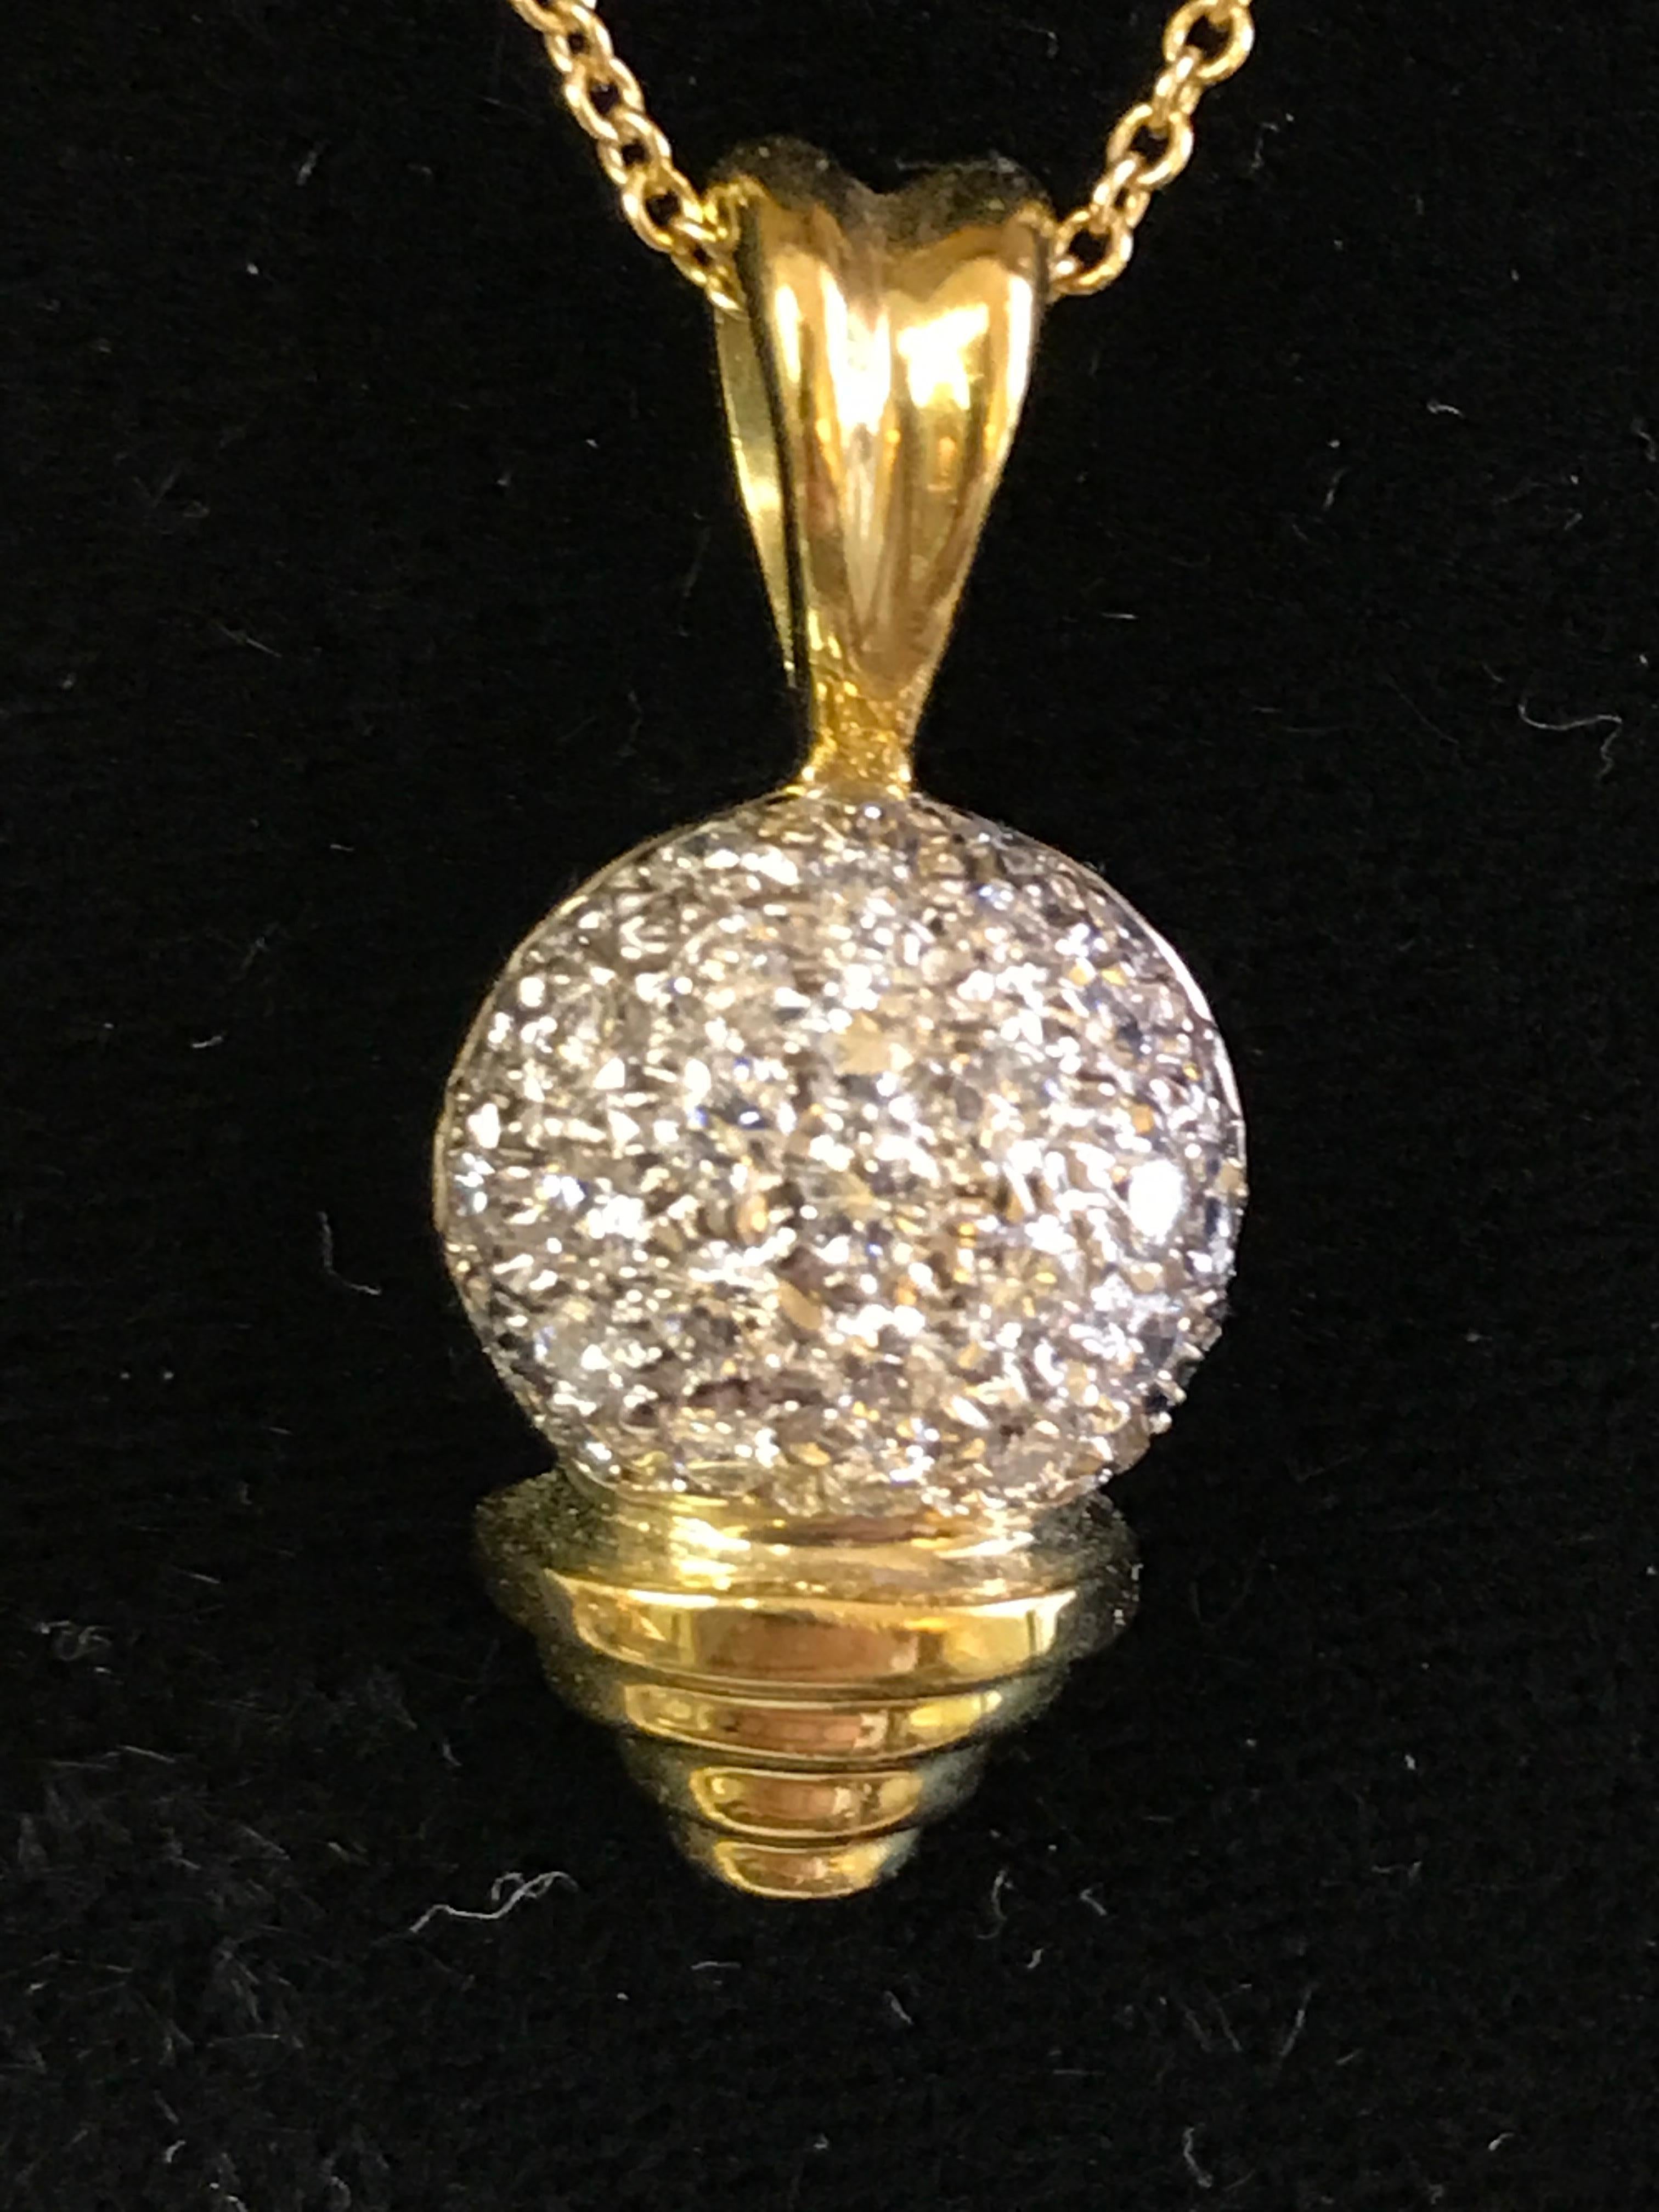 This is a perfect gift for any golfer in your life! You will for sure get noticed on and off the course.
Sal Praschnick Designer
18 karat yellow gold bale and golf tee
.74 total carat weight pave set diamonds in a round 